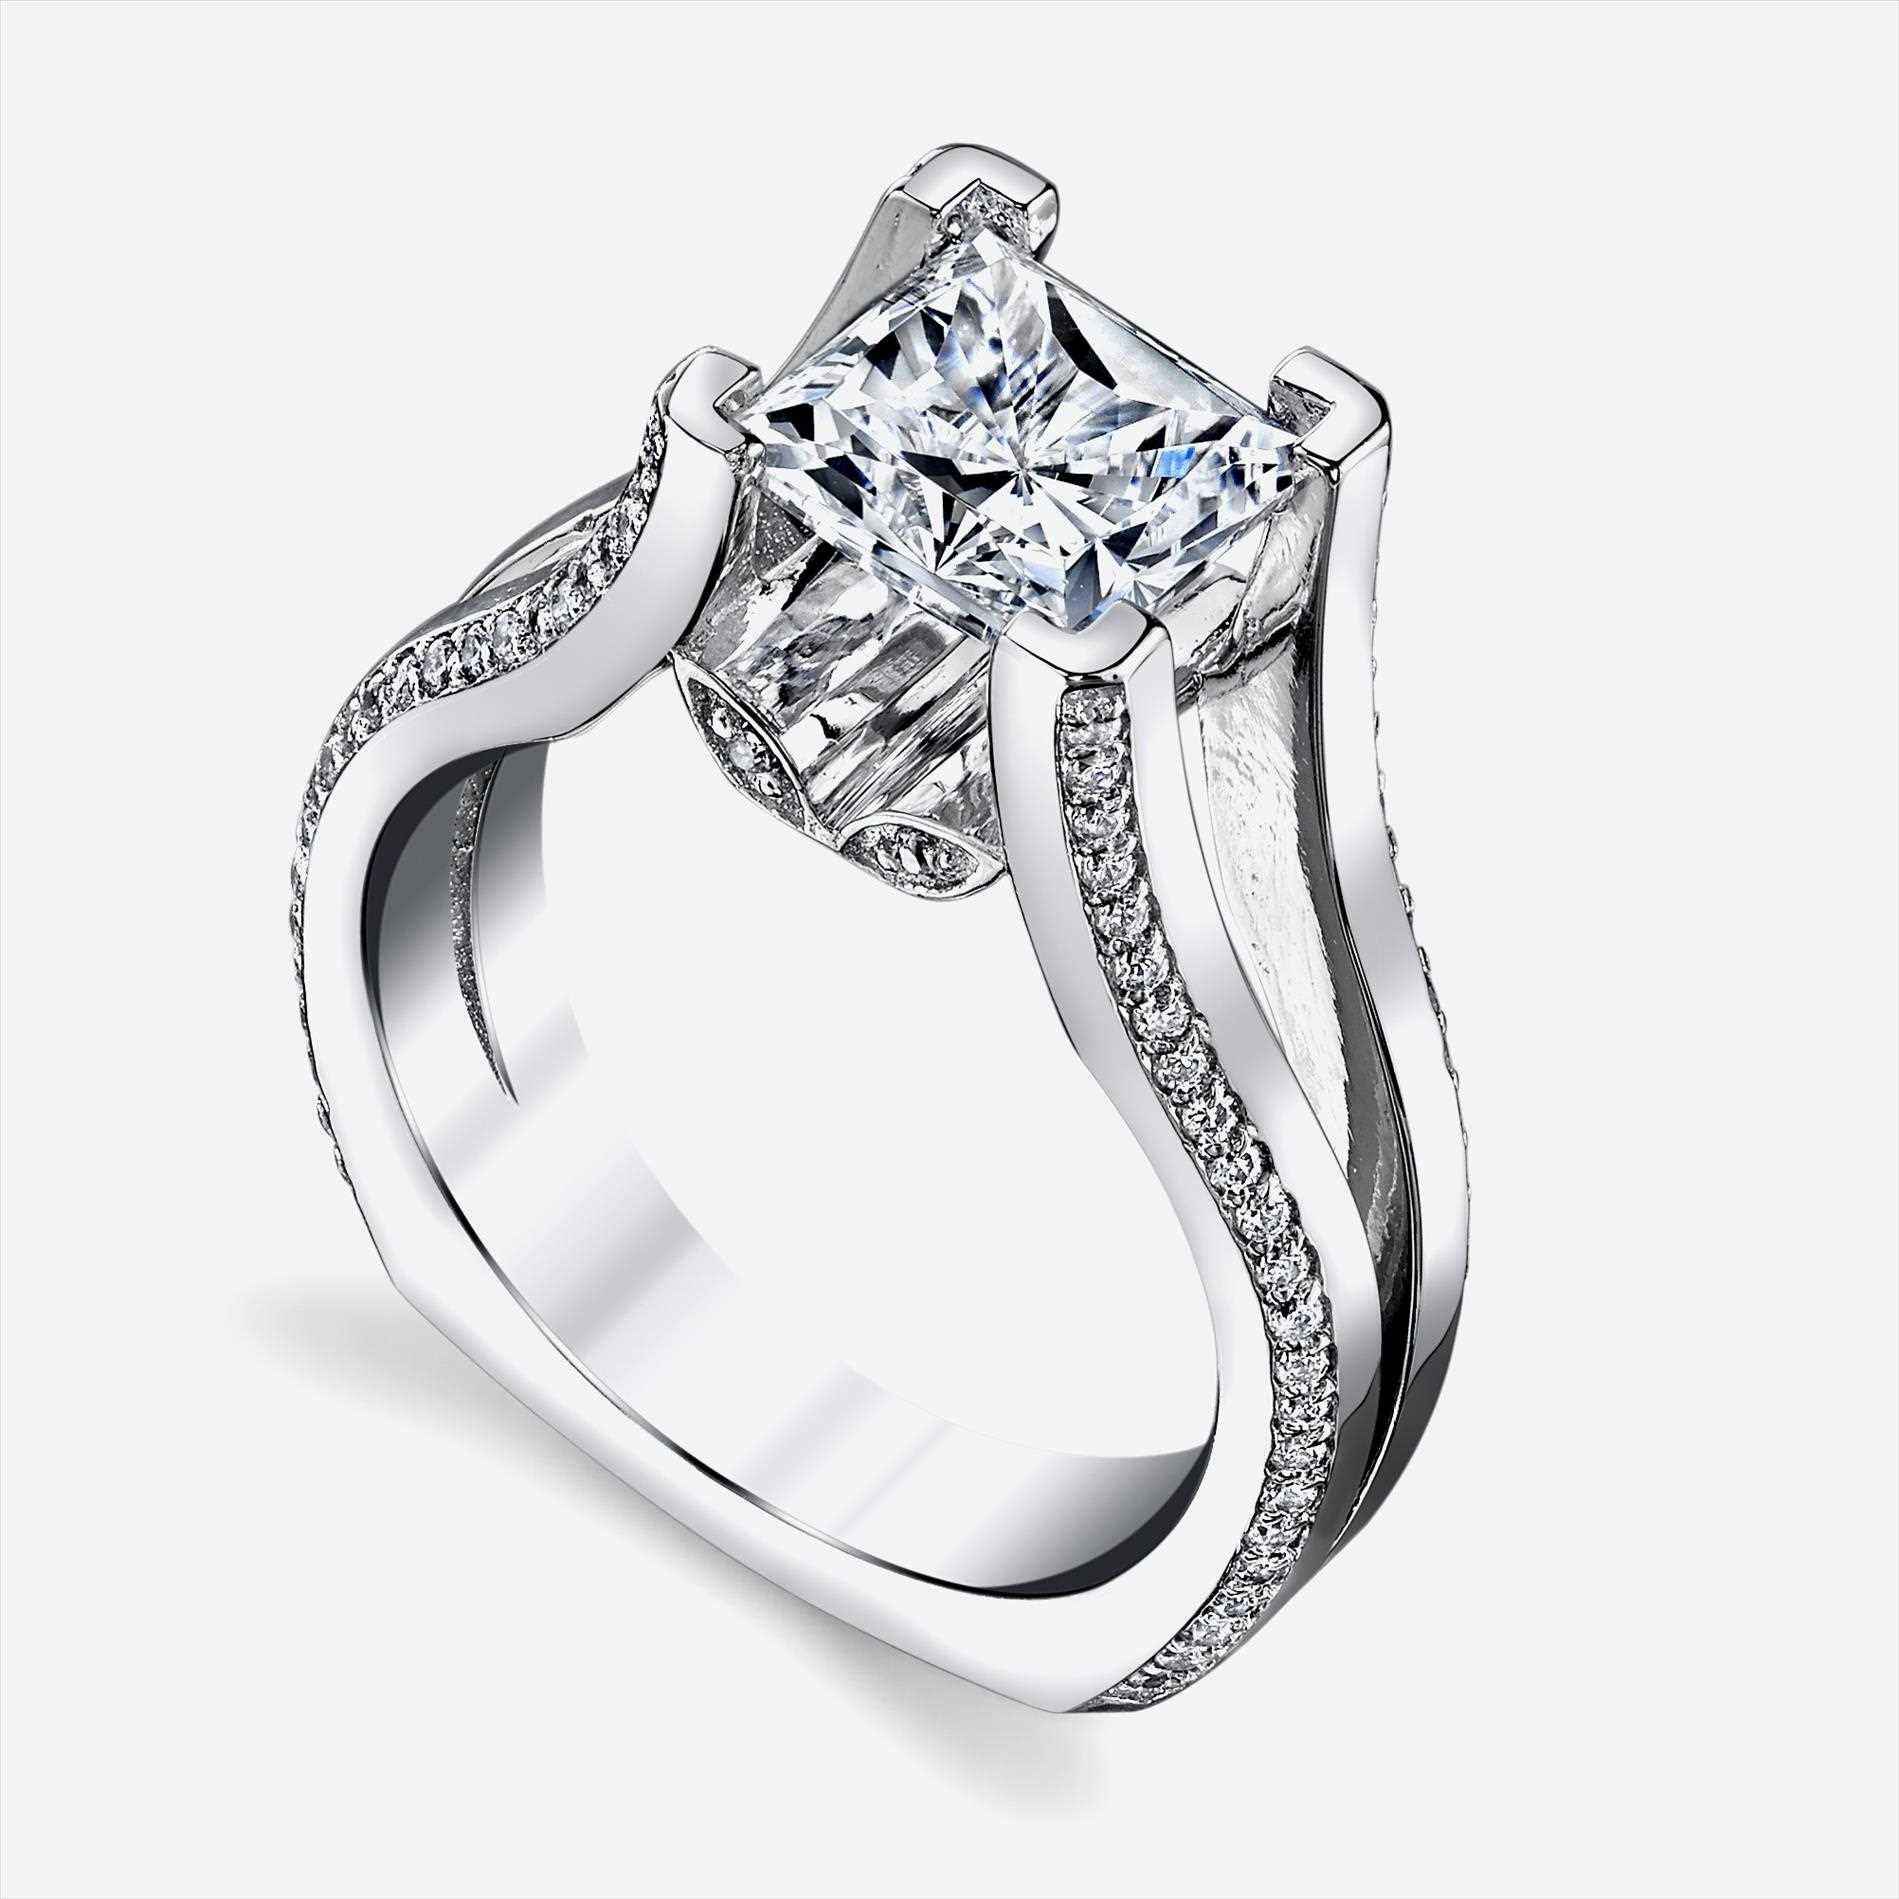 Cz Wedding Rings That Look Real
 Silver Engagement Amazon Cz Wedding Rings That Look Cz